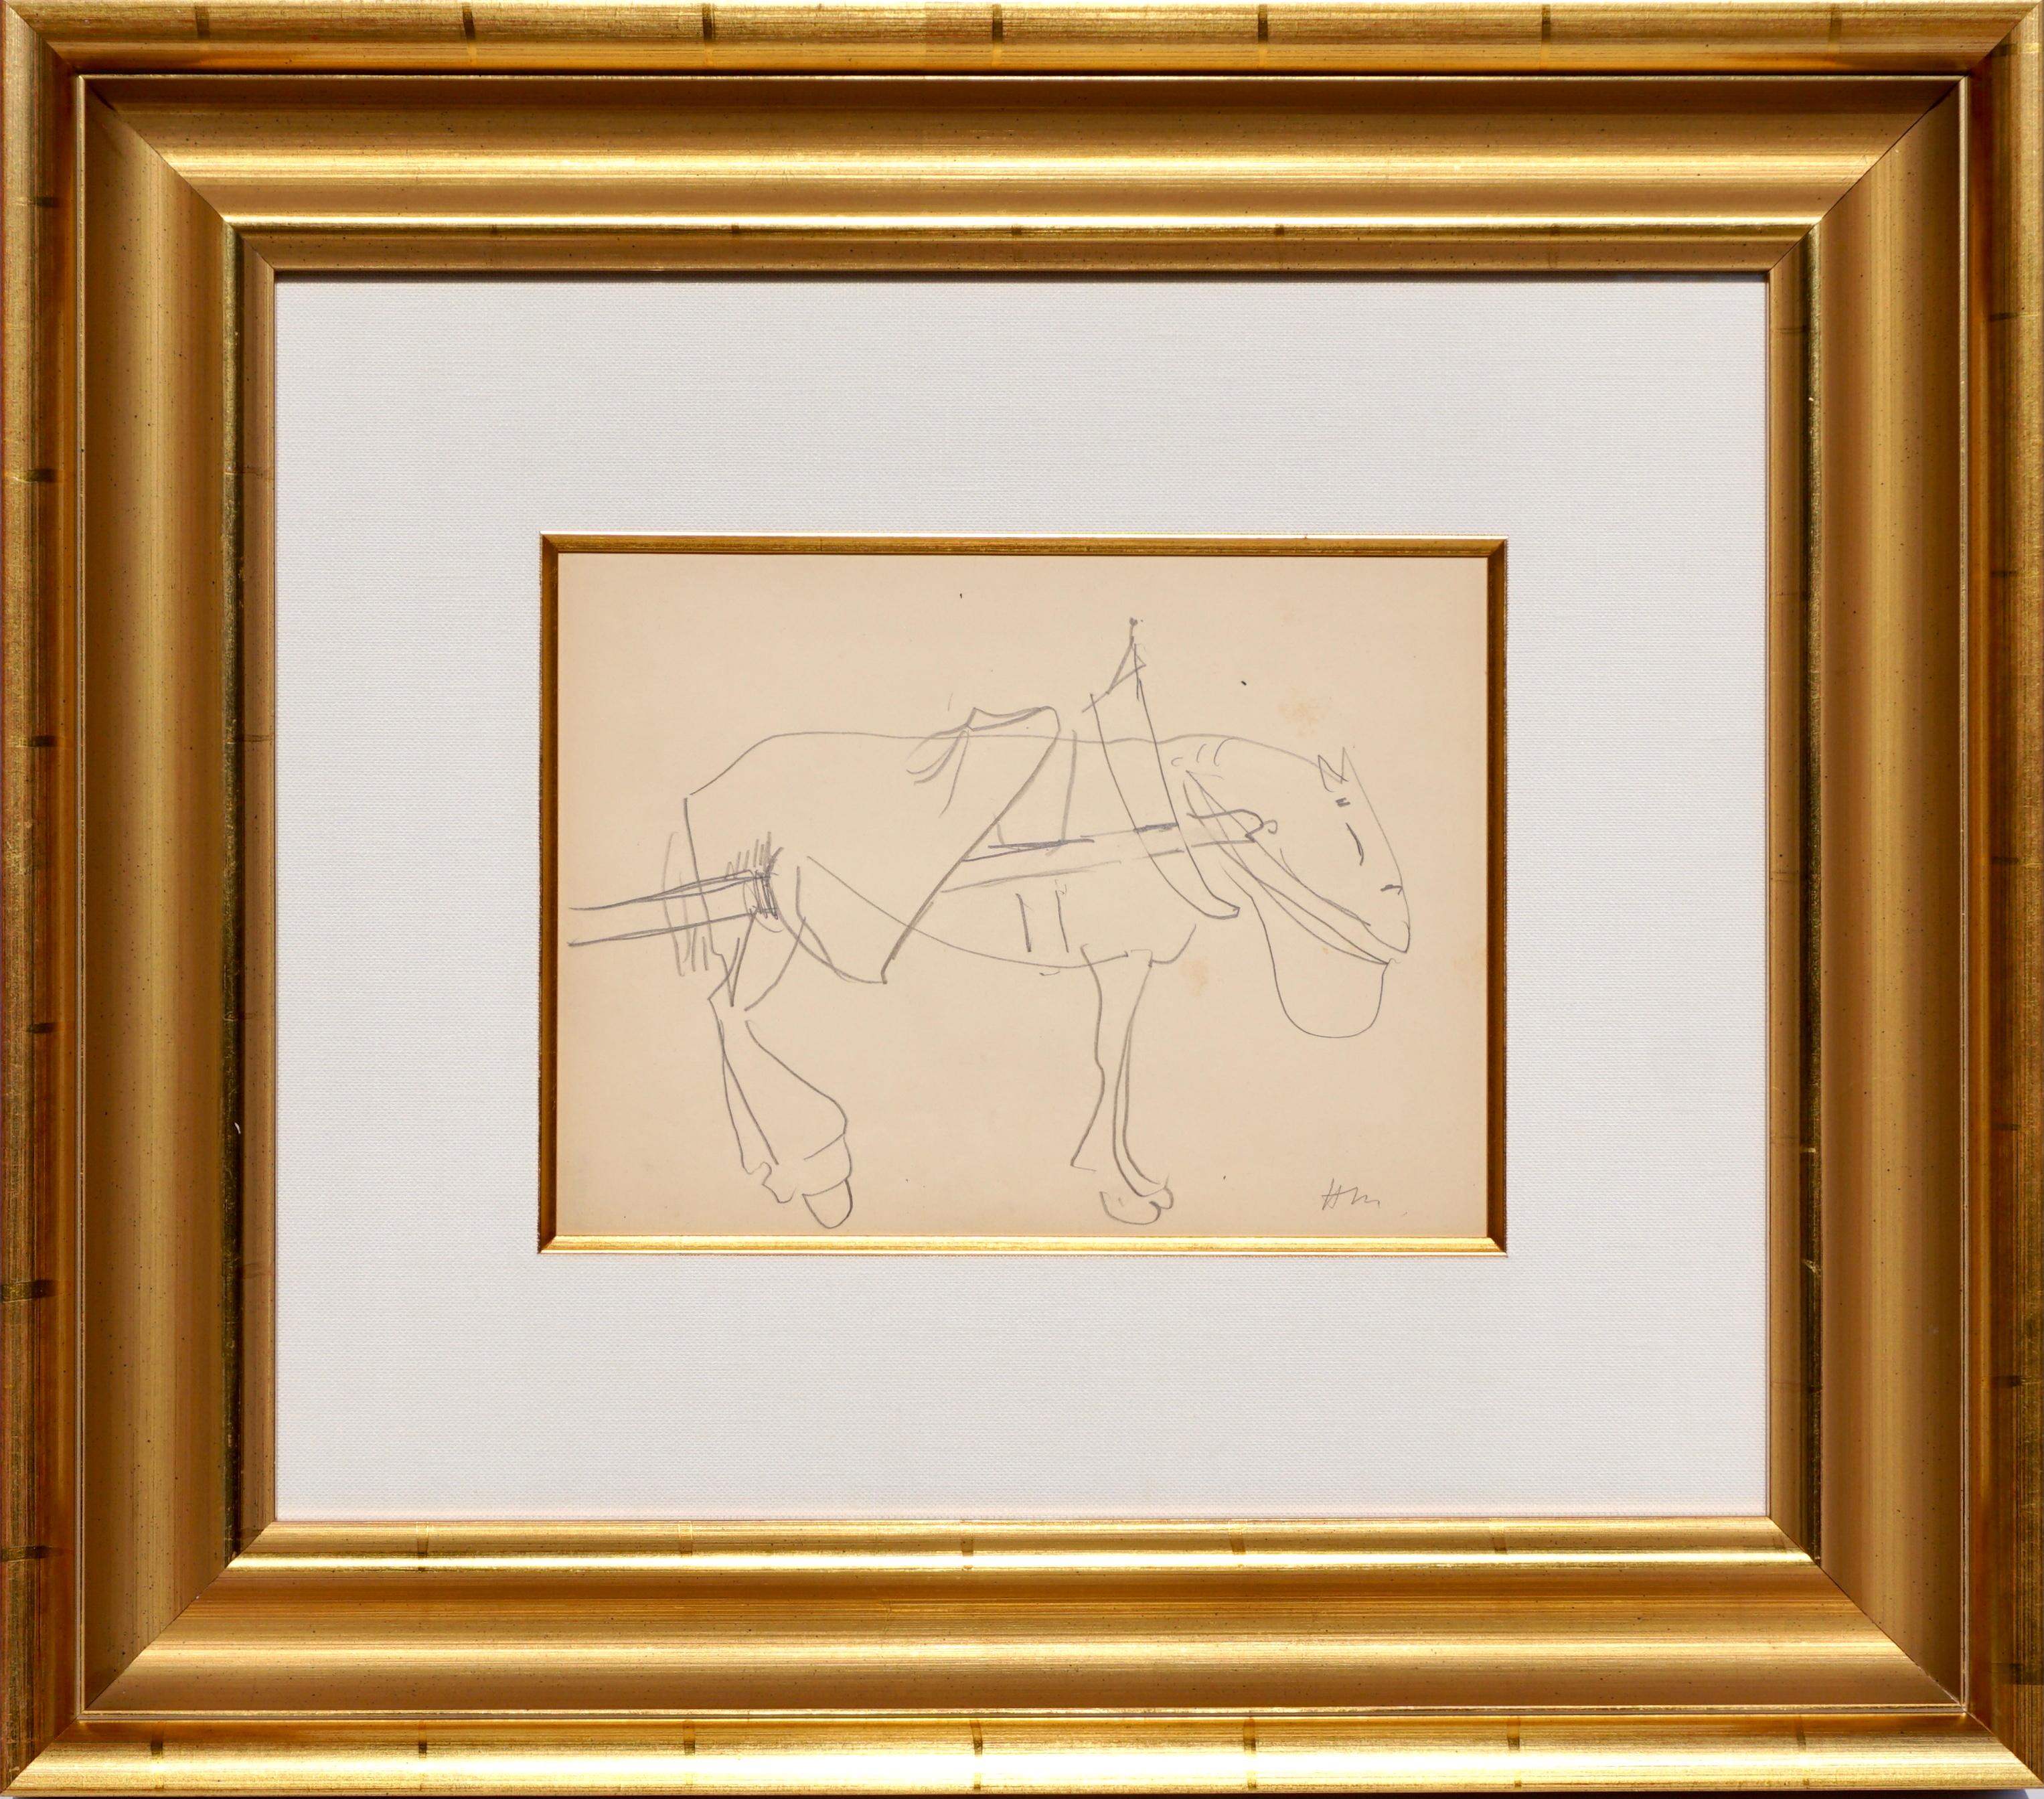 Henri Matisse (French 1869-1954) Pencil Drawing Of A Working Horse Catalogued as Number Z 548 in the Artist Archives

Pencil on paper, c. 1900, signed with initials 'HM' lower right.

Sheet: 9 3/8 x 11 3/4 in. 
Framed: 21.5 x 24.75 Museum Frame